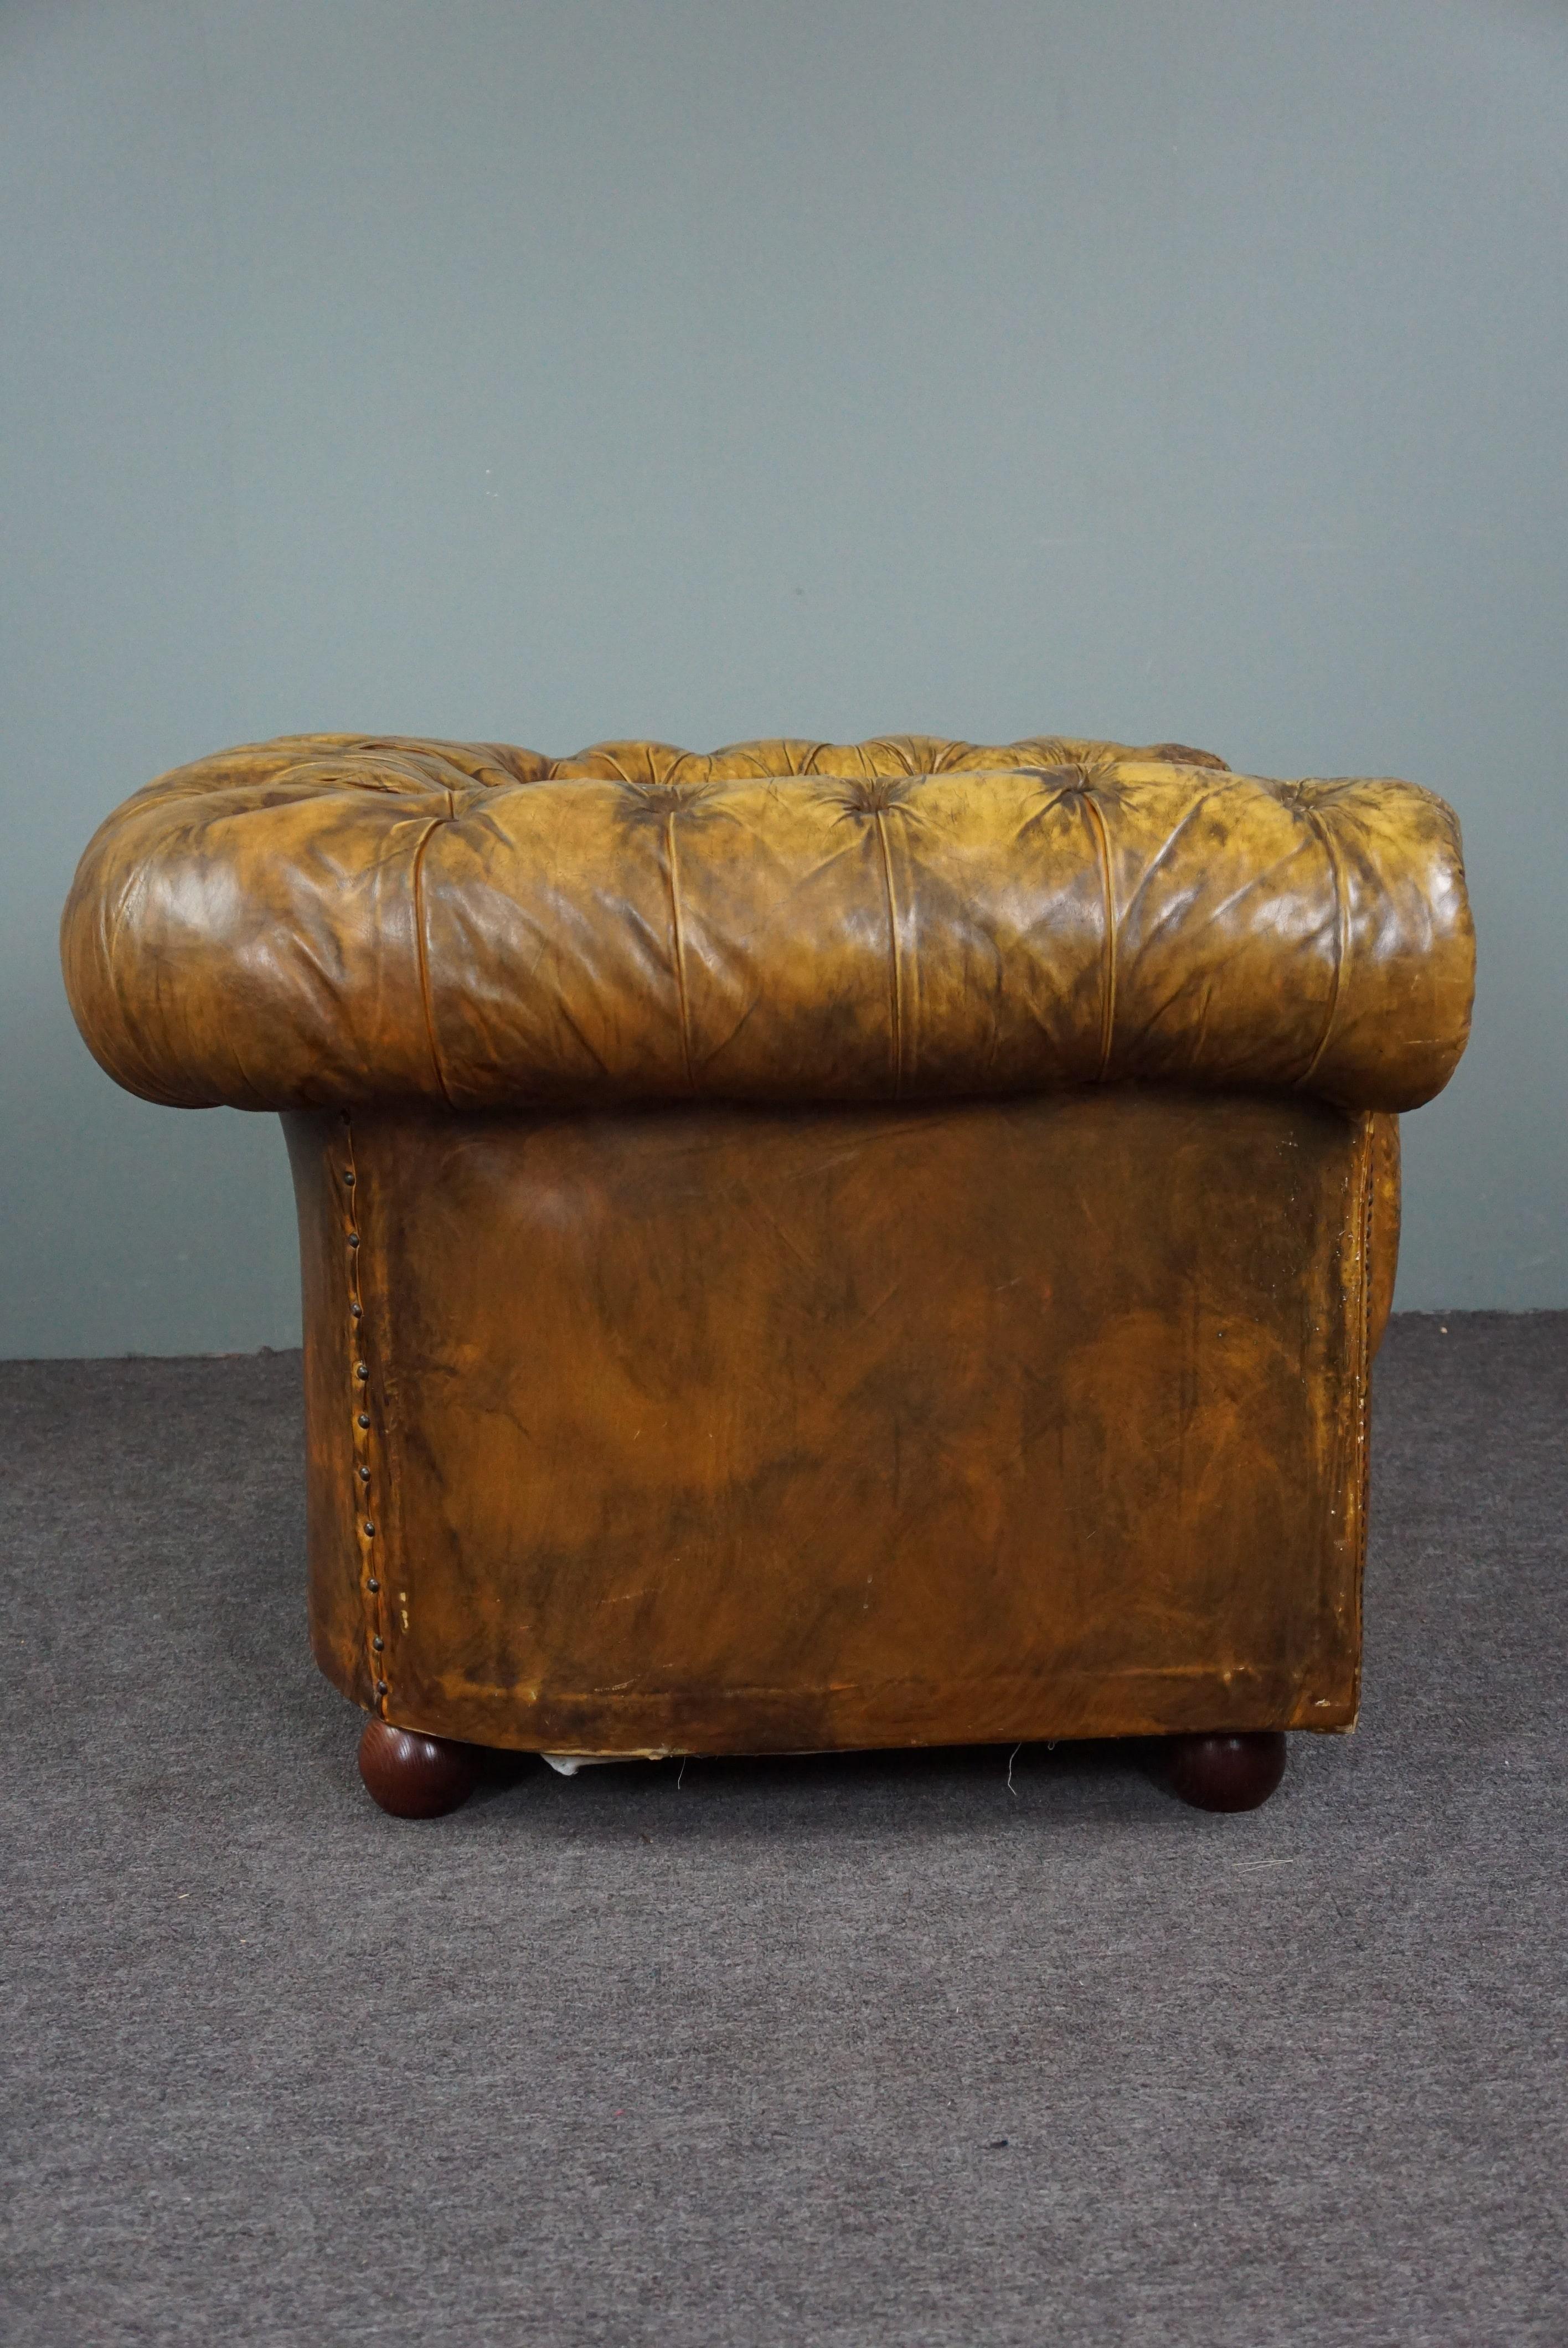 Offered is this wonderfully seated Chesterfield armchair with an amazing appearance due to its patina and color.

This imaginative patinated Chesterfield armchair has a padded back and armrests, a coil spring base and is still filled with horsehair,